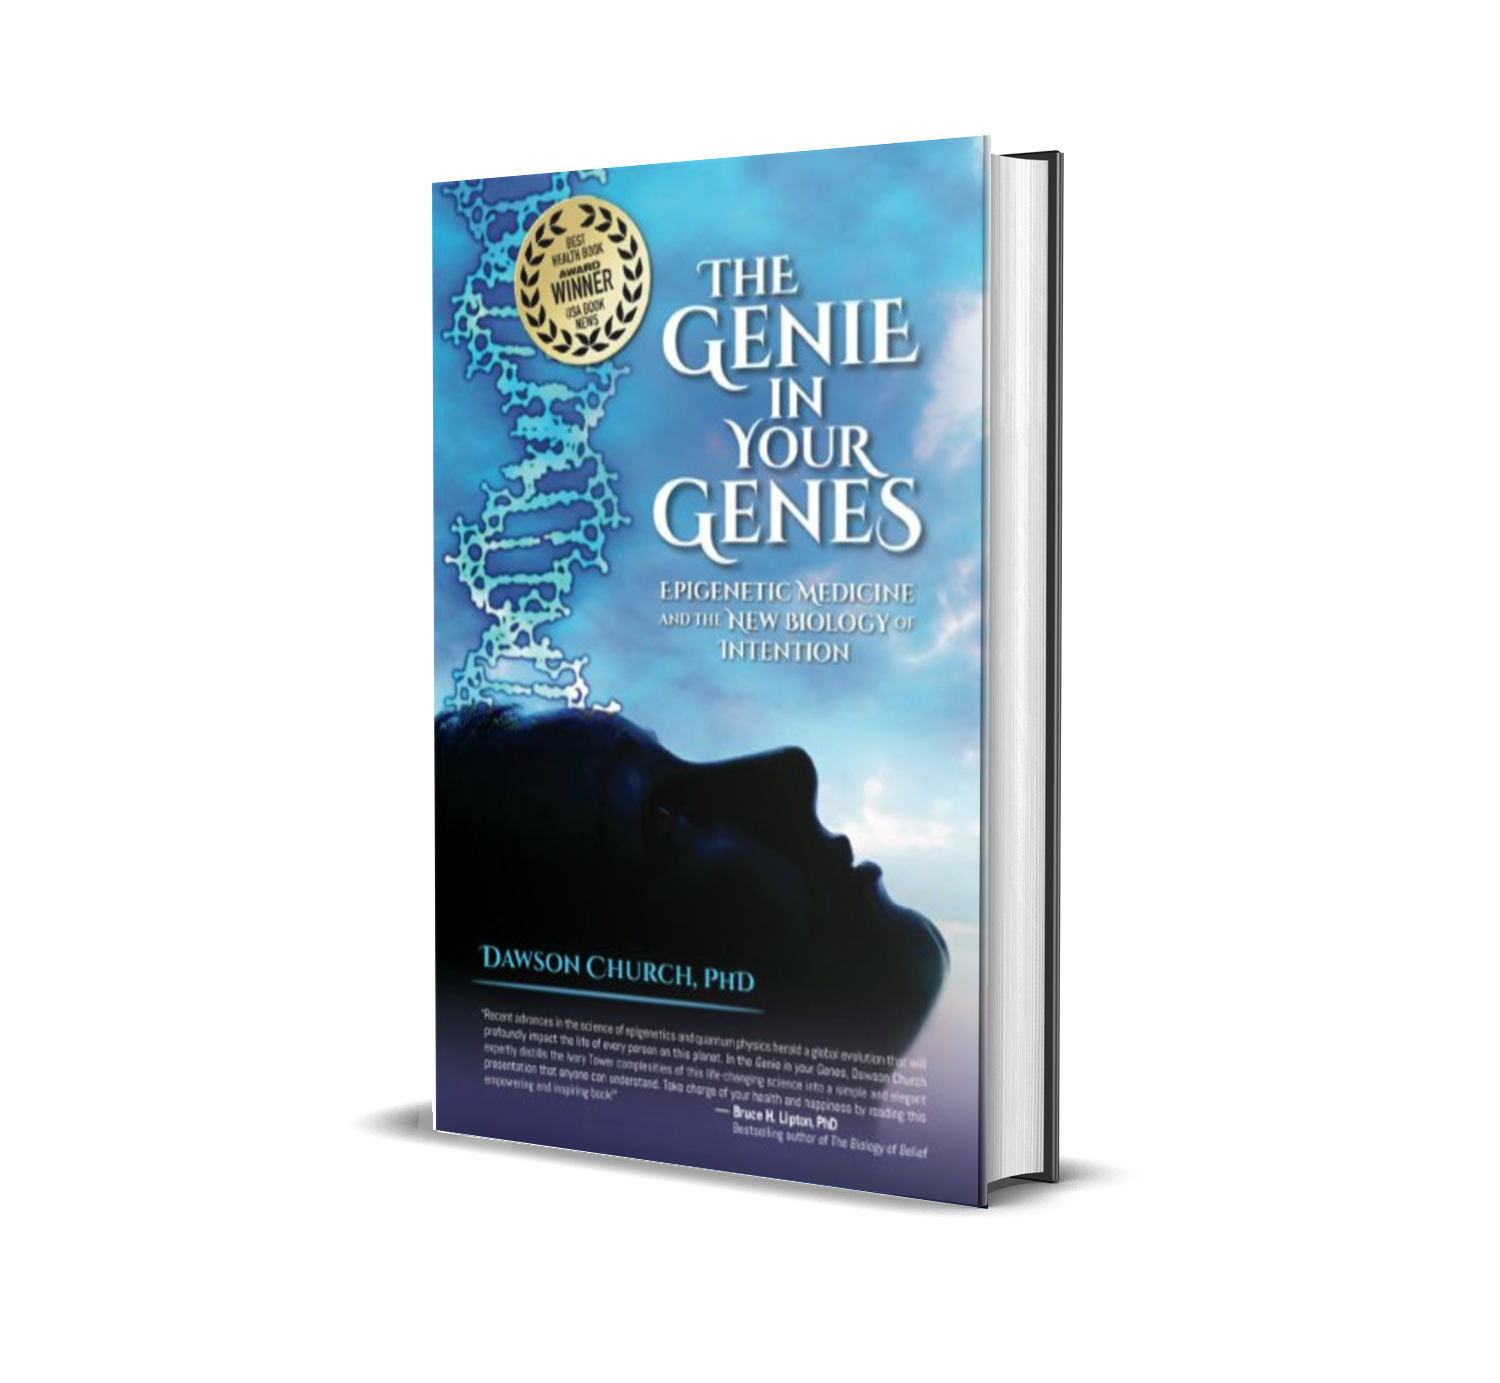 The Genie in Your Genes